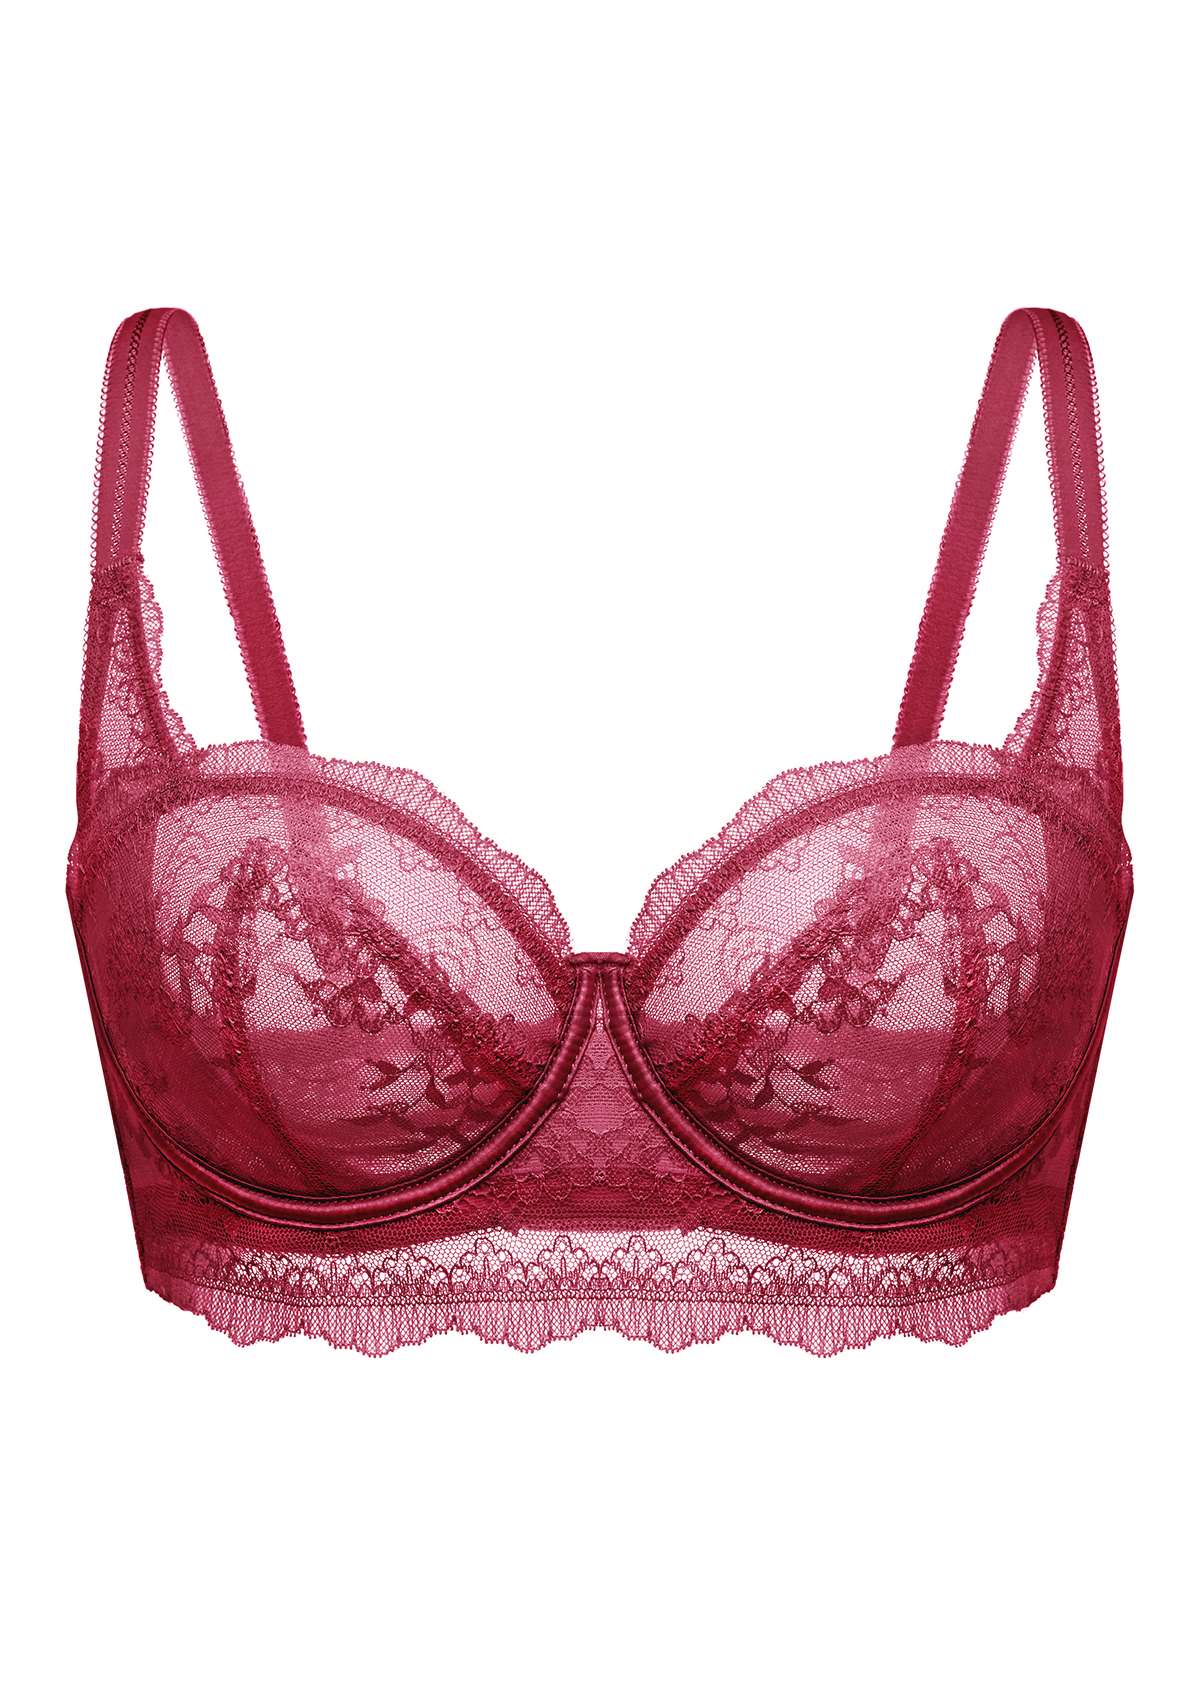 HSIA Floral Lace Unlined Bridal Balconette Bra Set - Supportive Classic - Burgundy / 40 / D